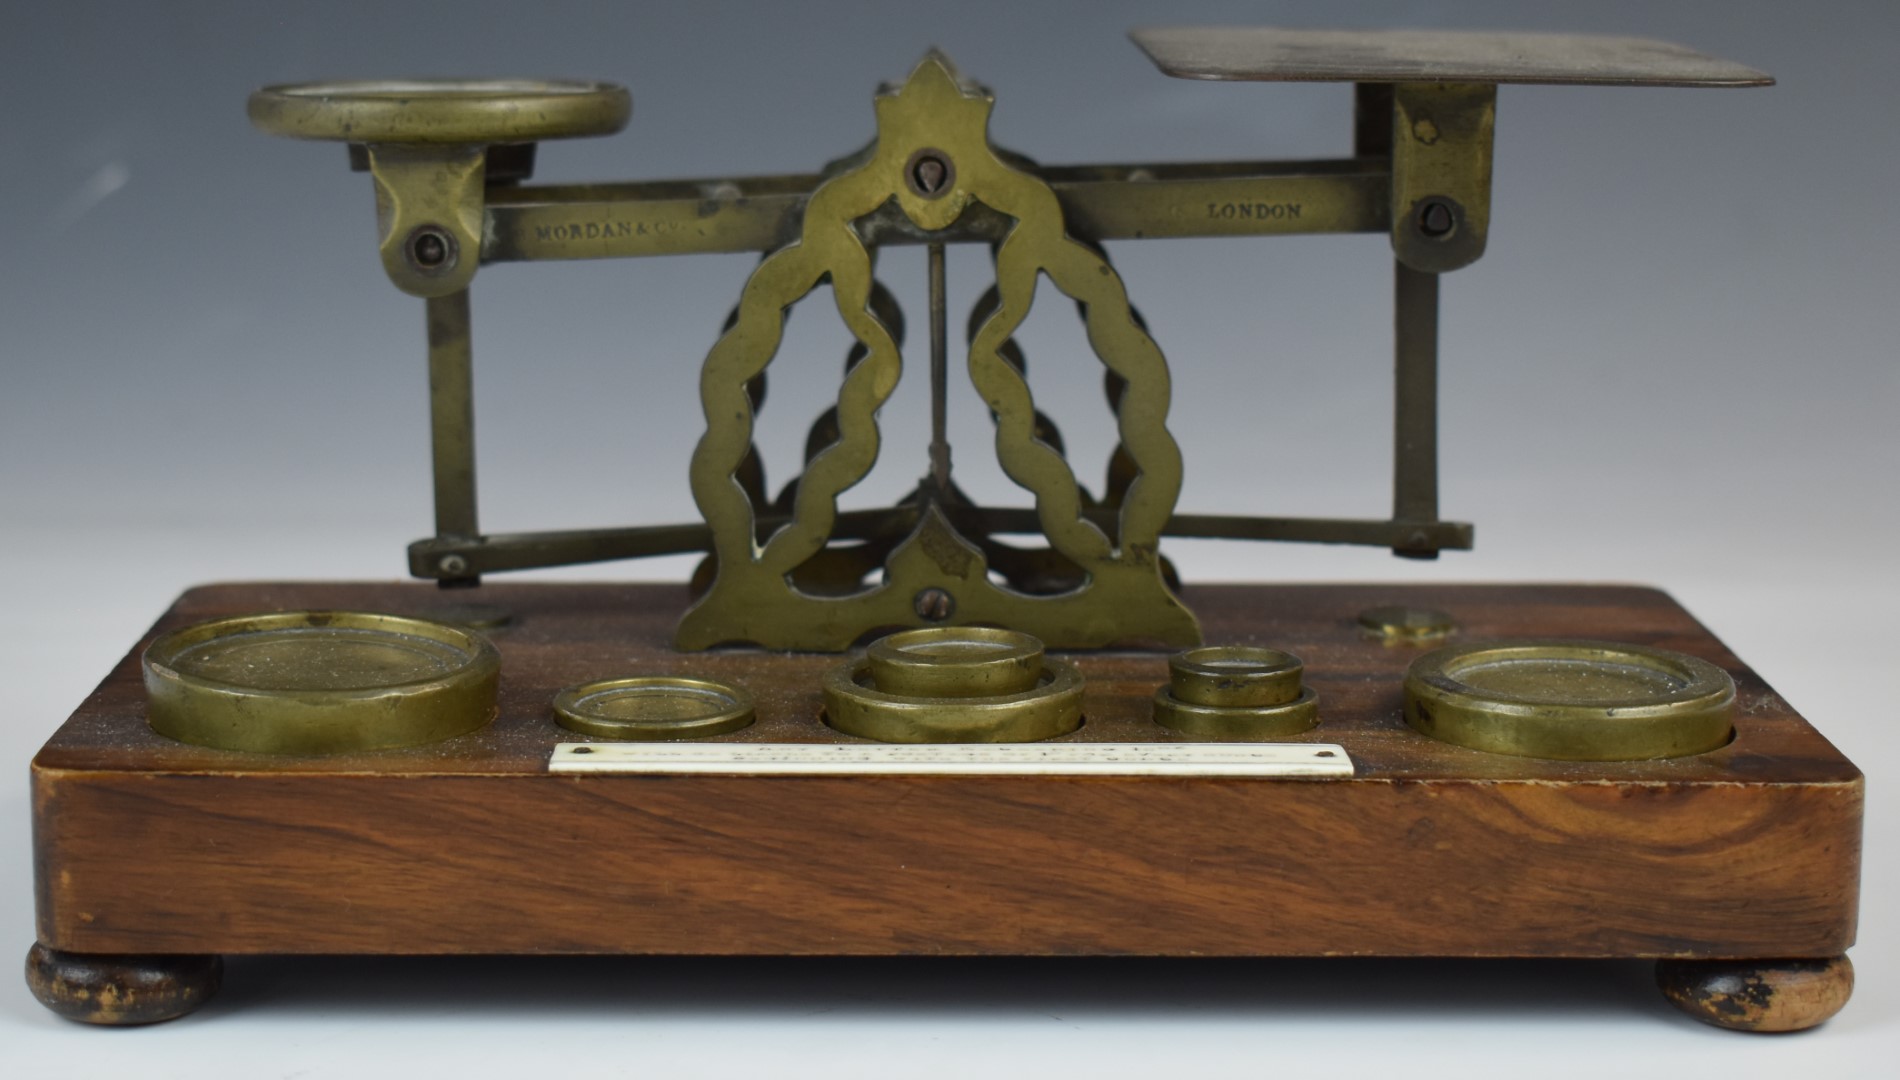 Mordan & Co. Victorian brass postage scales, on wooden base with weights and with postage rates to